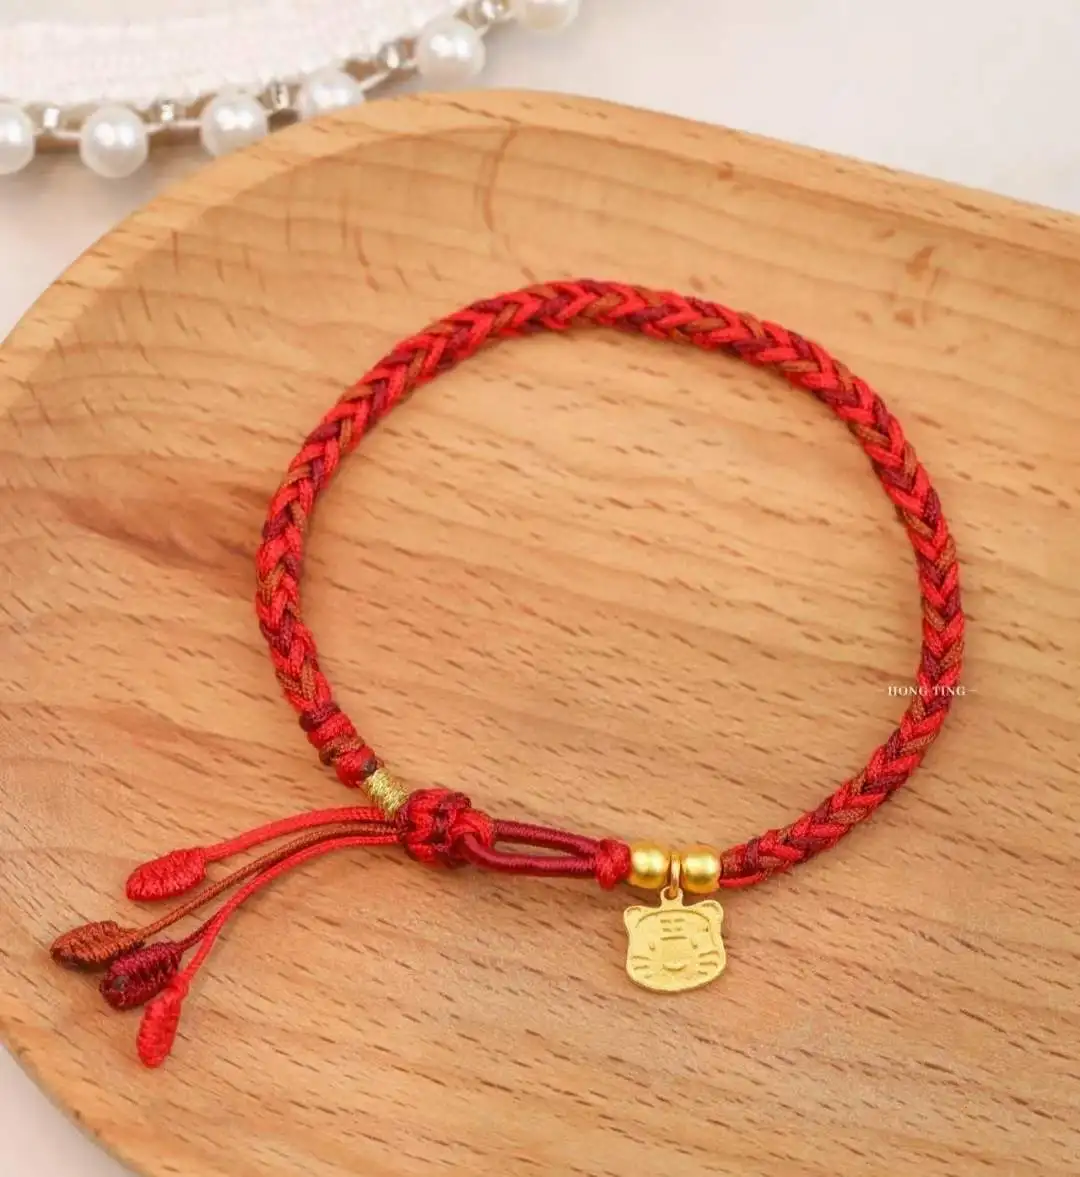 

1pcs Pure Gold Bracelet Women's Real 24K Yellow Gold Luck Tiger Charms Red String Lover Bracelet Jewelry Couple Gift